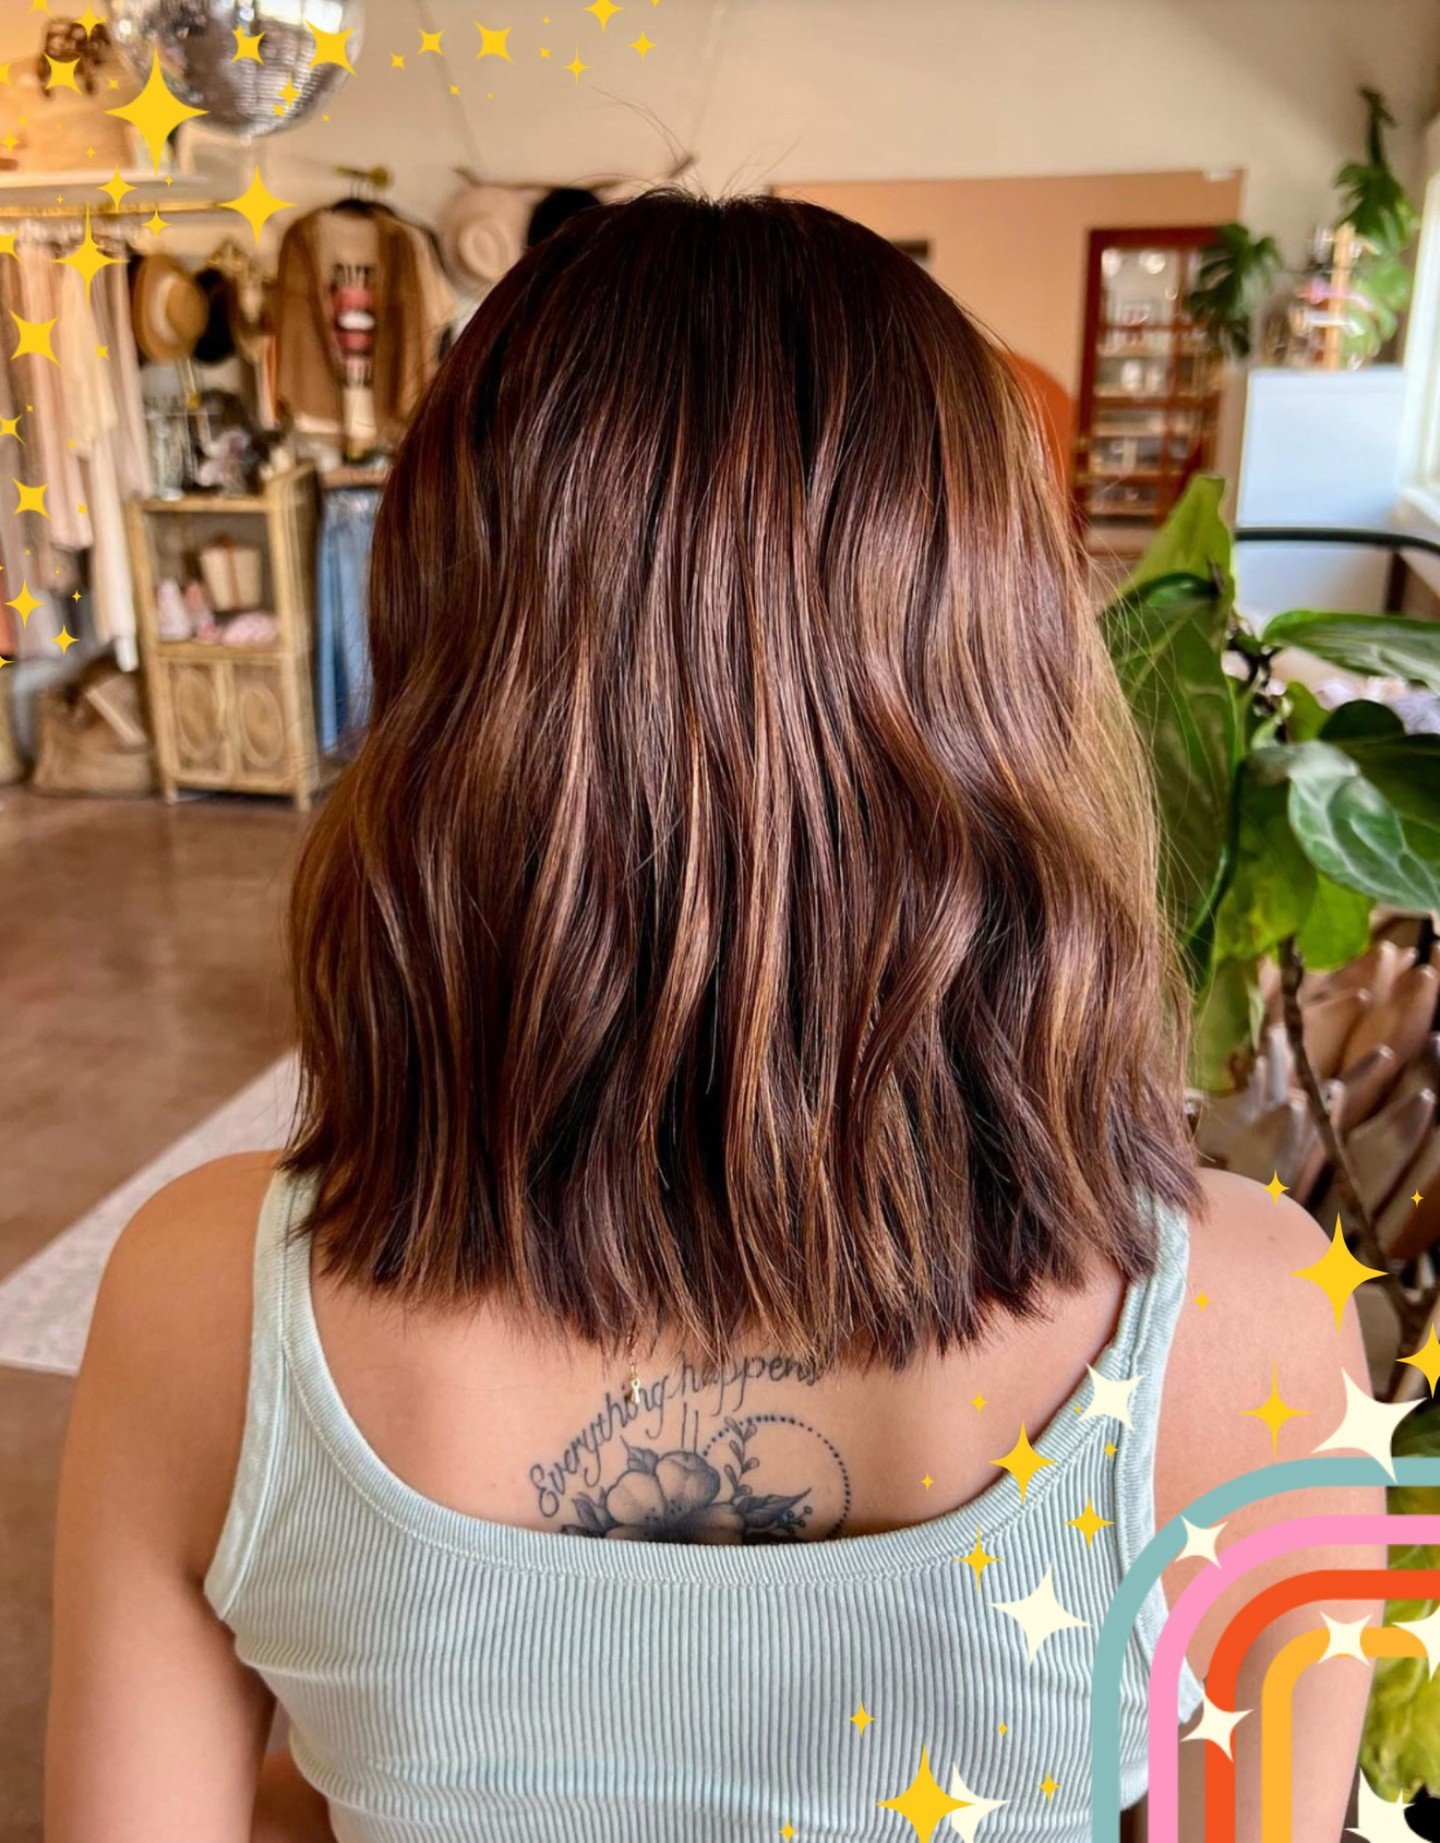 The warmer weather is coming and your girl @stepheniepowers loves to do some cute chops! Get into the season with new look. Book today, hit the link in Bio.
*
*
*
*
*
#randco #randcocolor #randcolove #phoenixaz #phoenixazsalon #swoonsalon